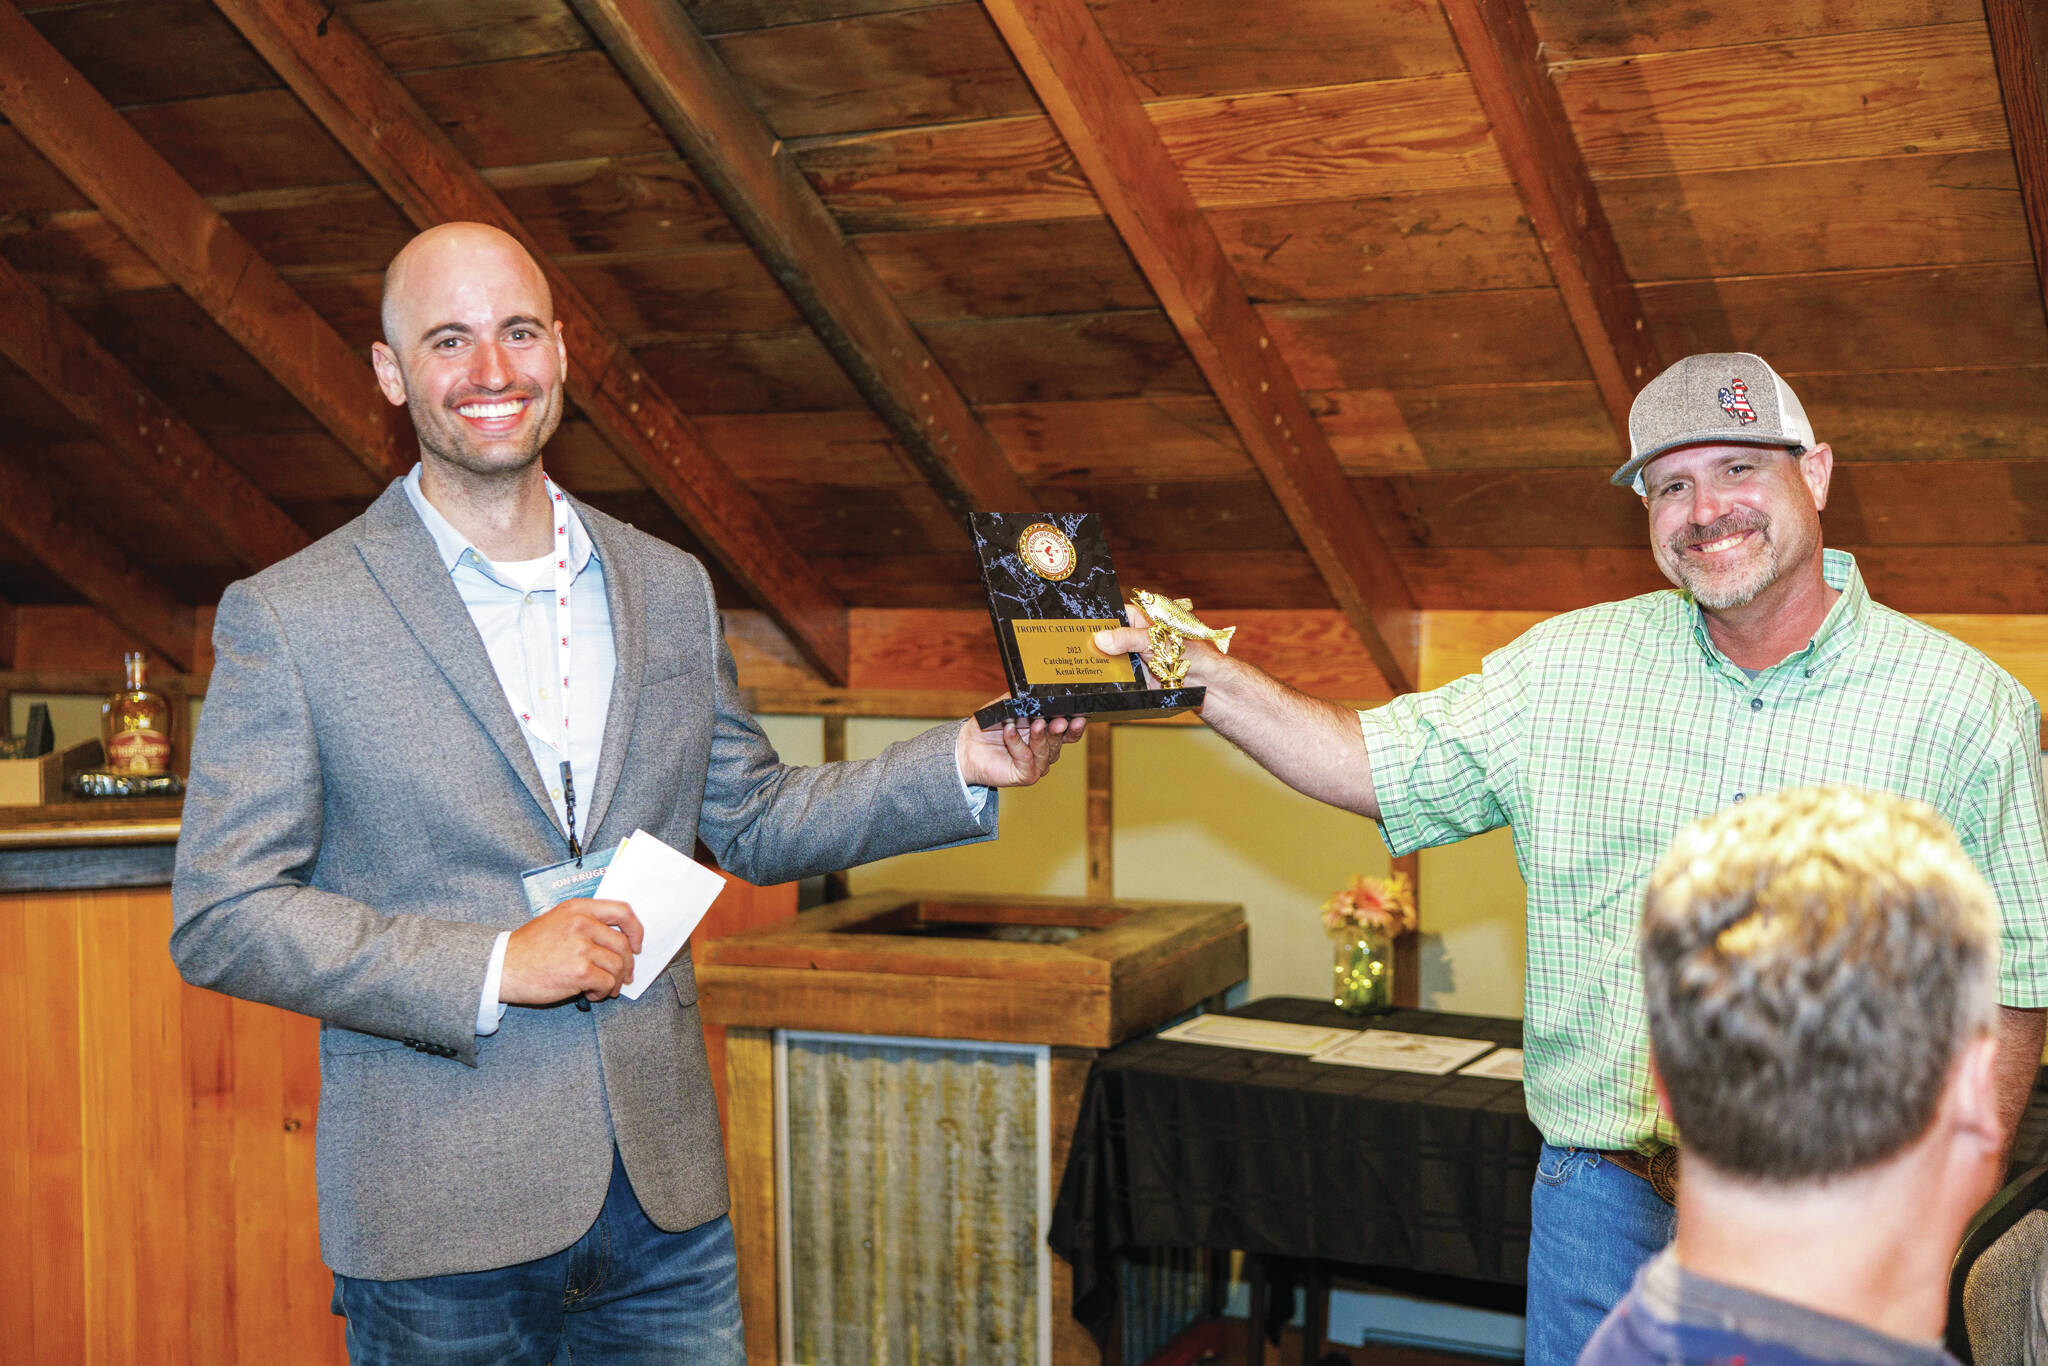 Photo courtesy Josiah Martin/Kenai Peninsula Food Bank
Jon Kruger hands an award for Trophy Catch of the Day to a participant of Catching for a Cause at the Cannery Lodge in Kenai.